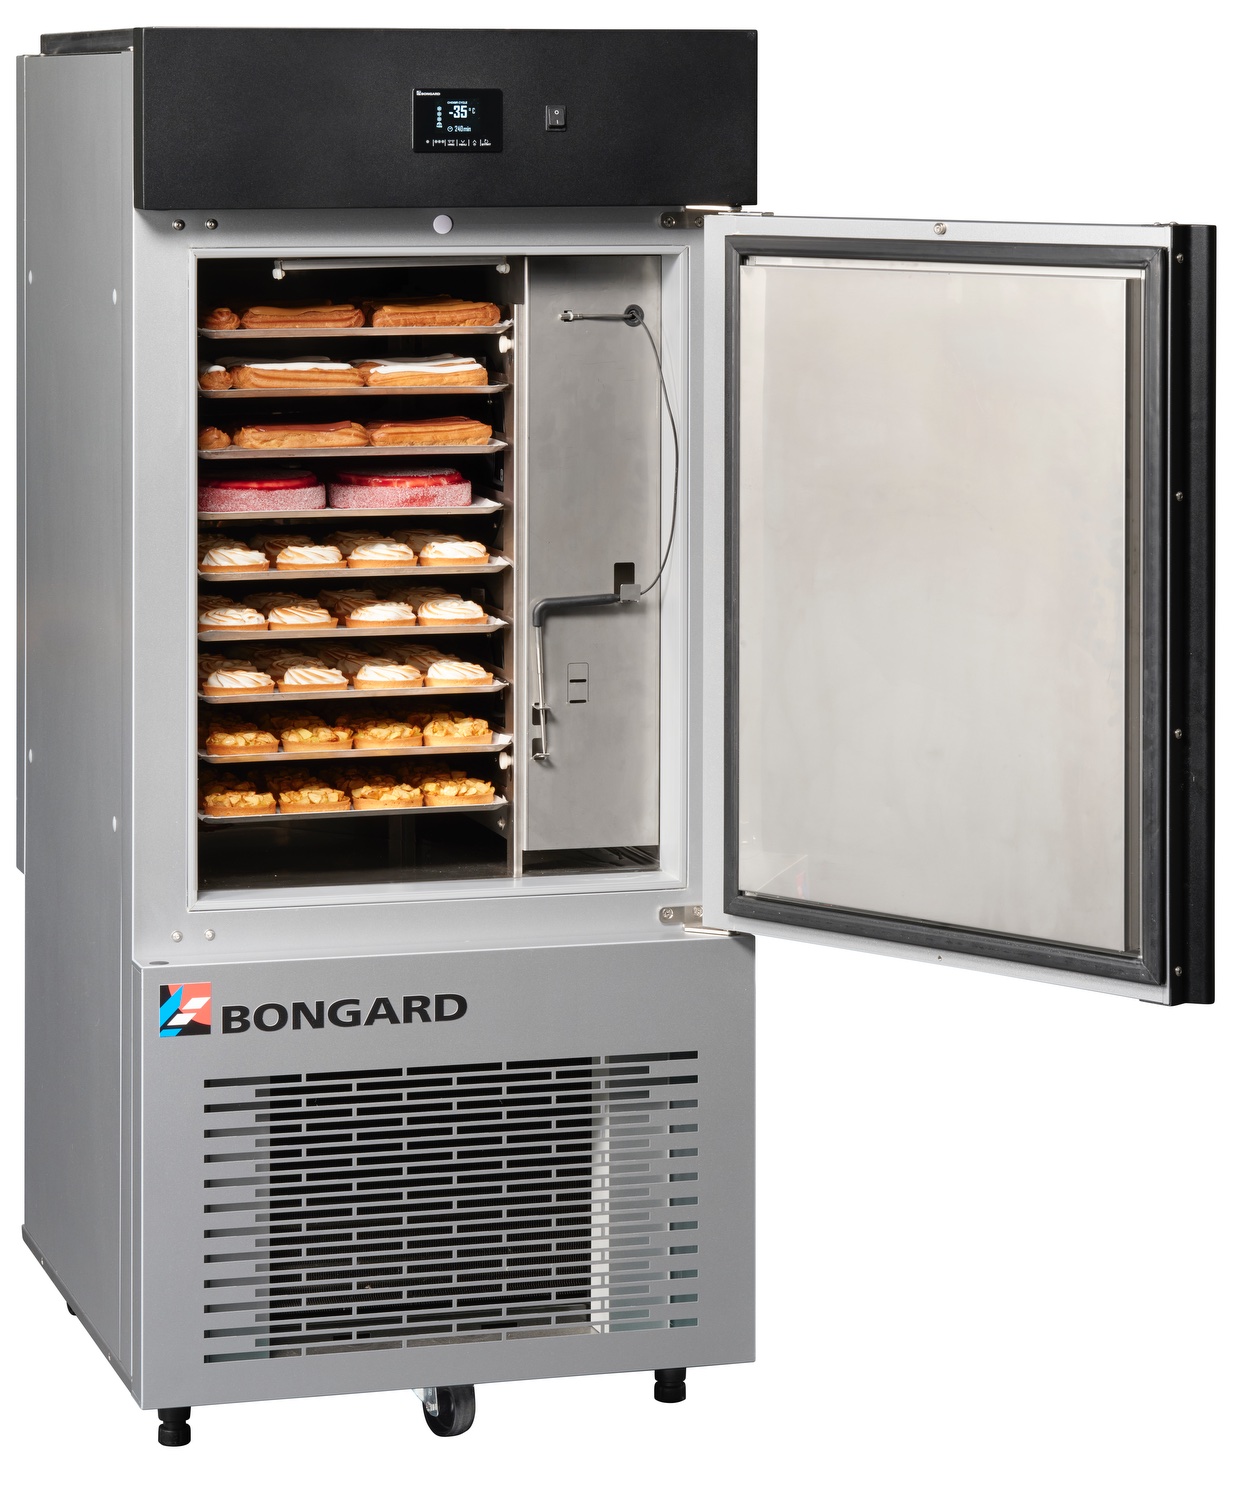 KRONOS-P quick cooling unit and reach-in blast freezer